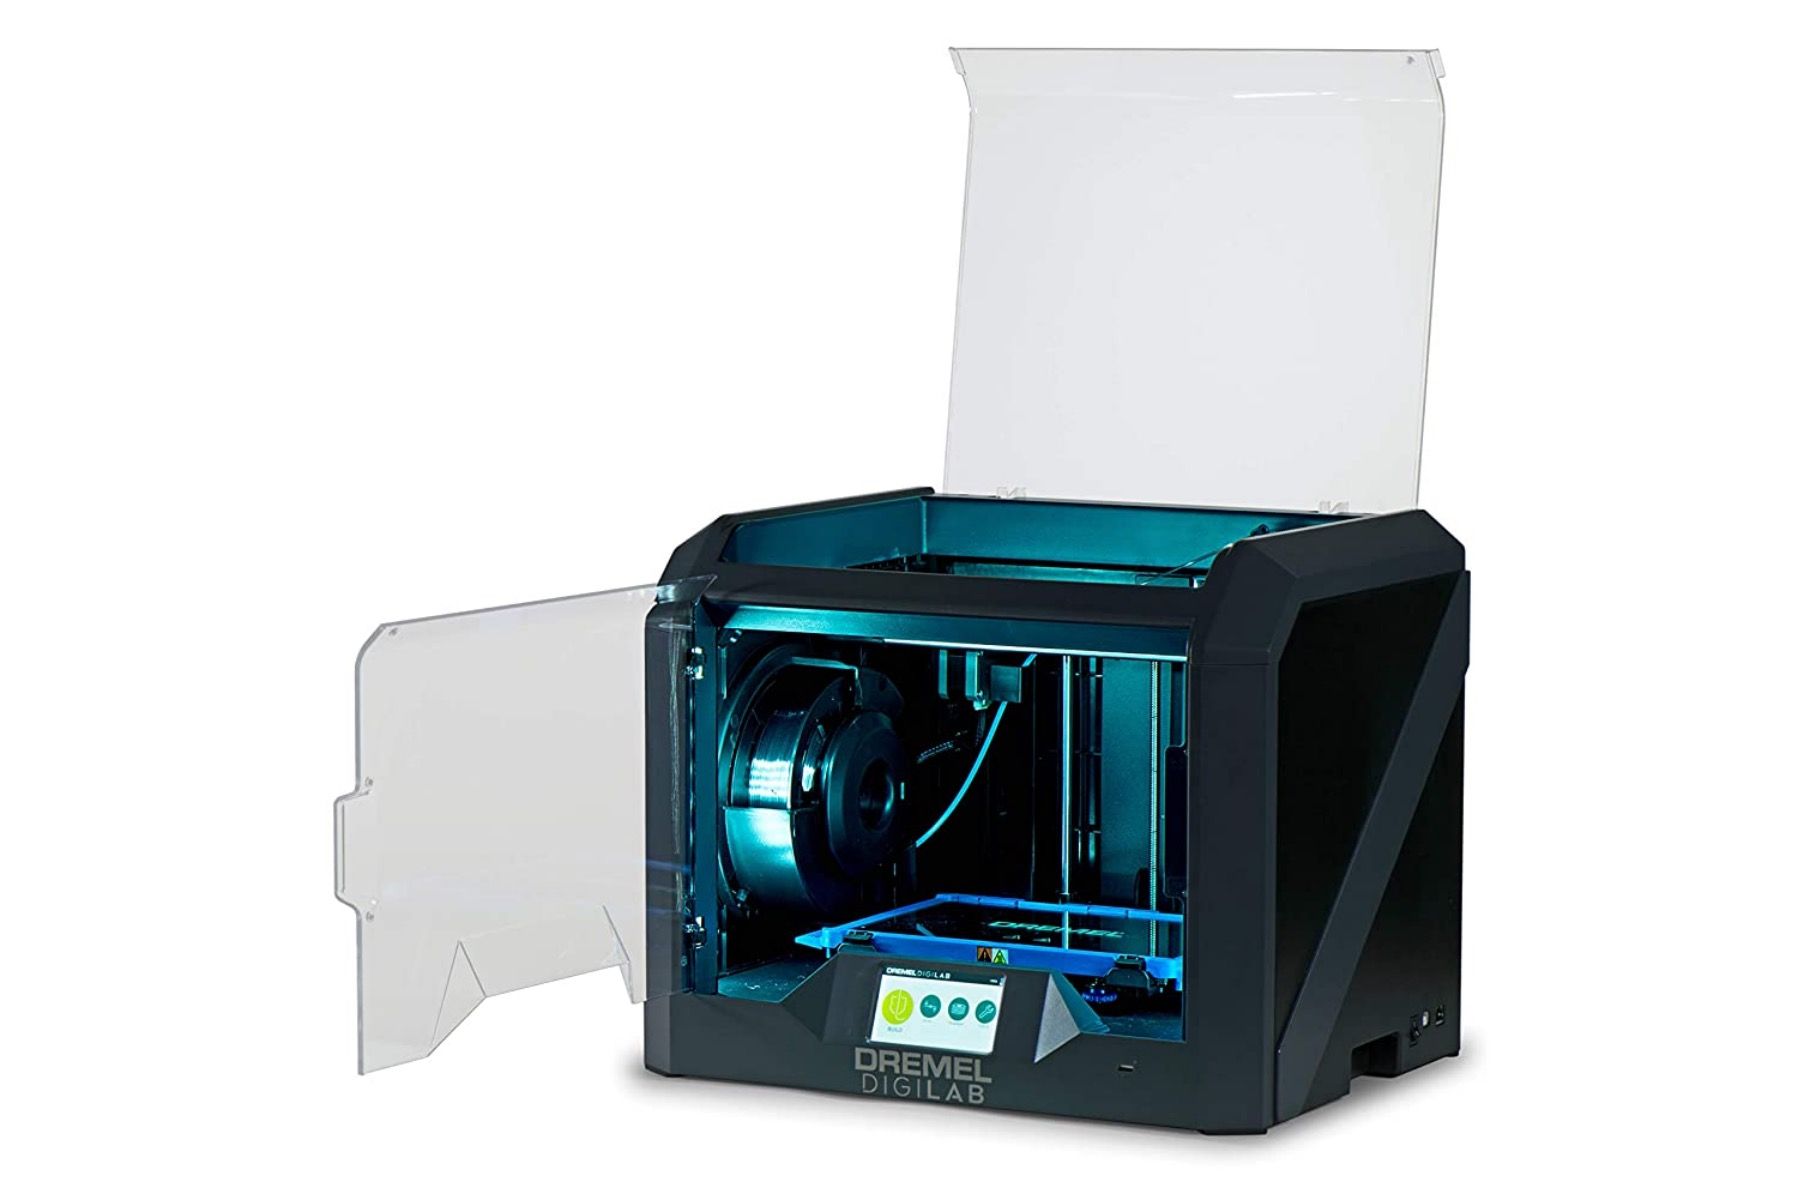 A Dremel DigiLab 3D printer with front and top lids open